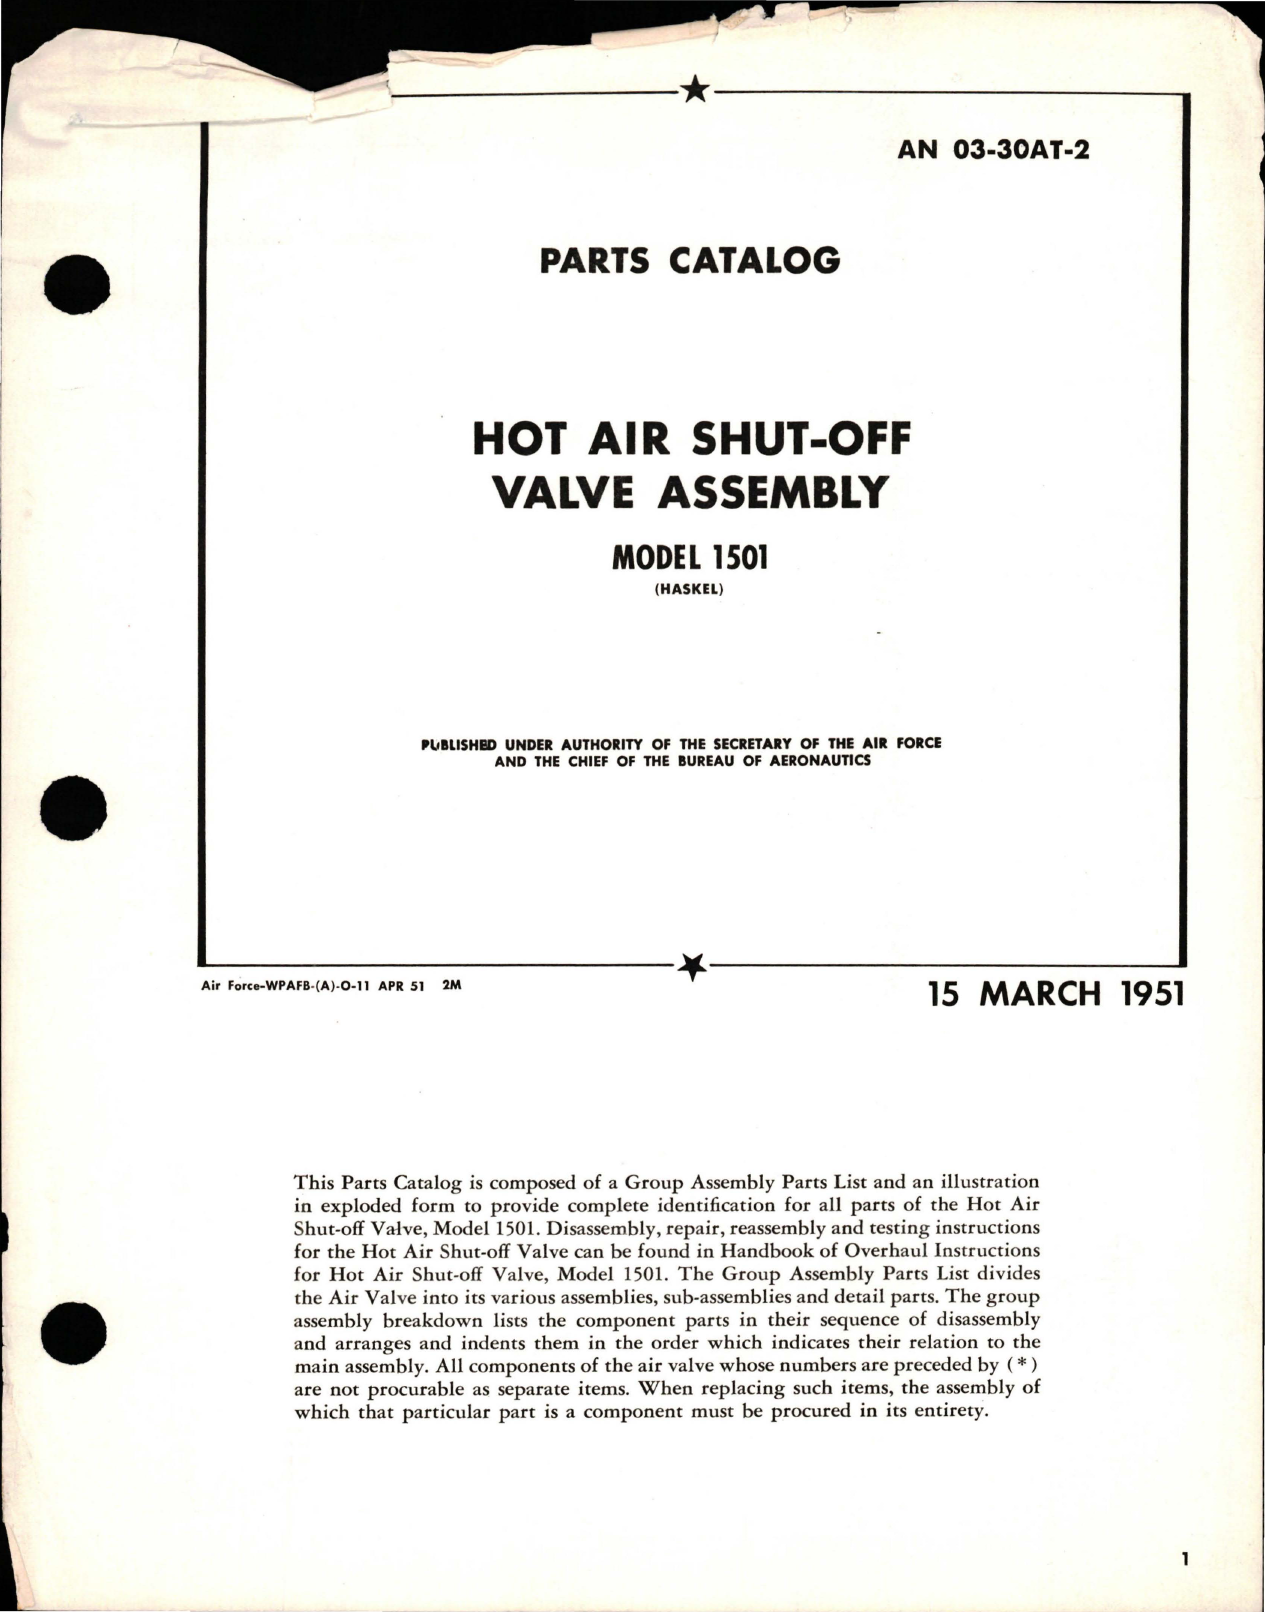 Sample page 1 from AirCorps Library document: Parts Catalog for Hot Air Shut-Off Valve Assembly - Model 1501